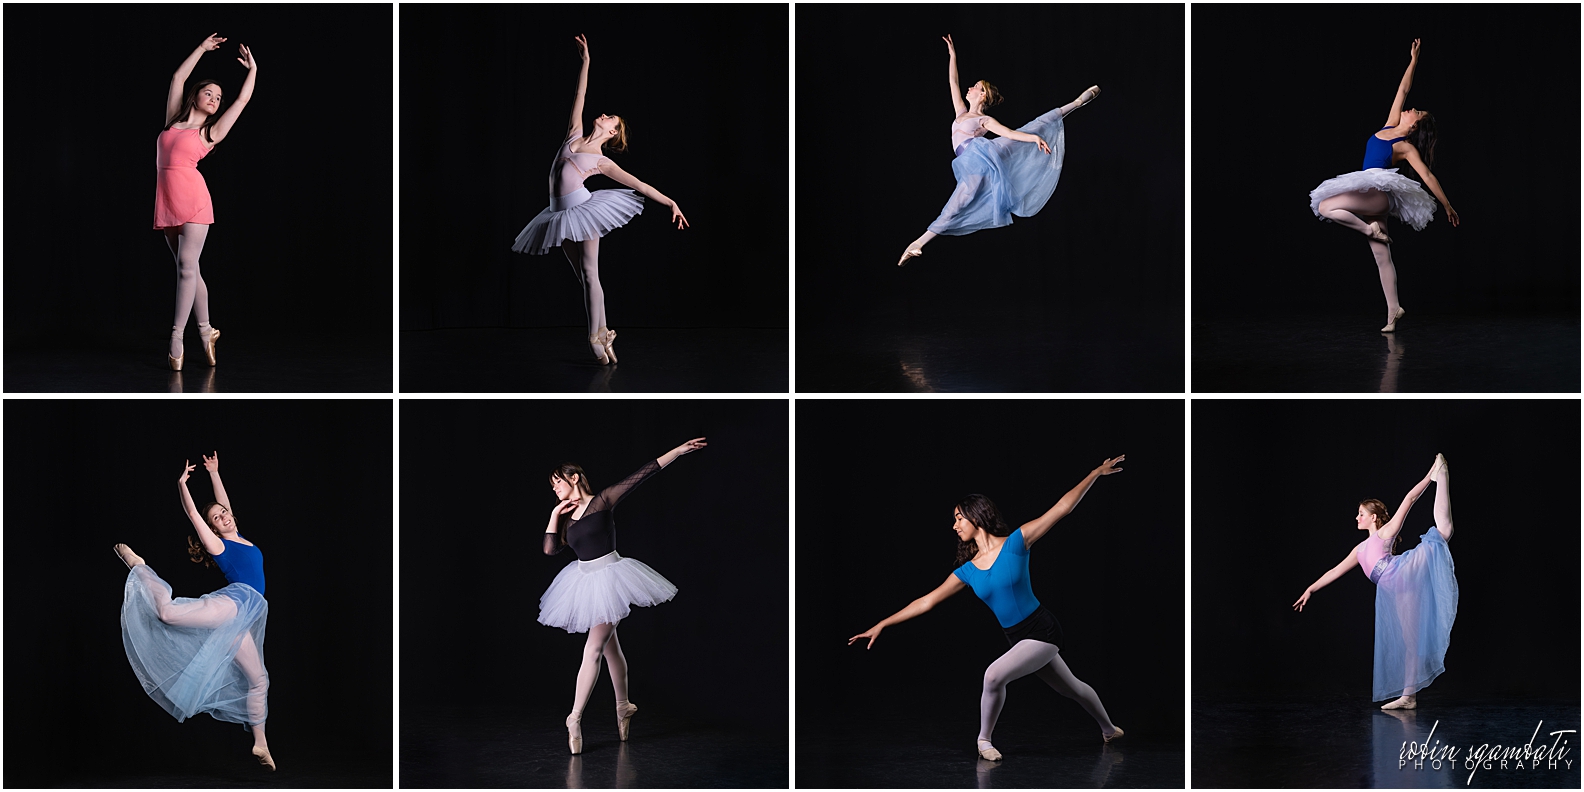 8 photo collage of ballet students